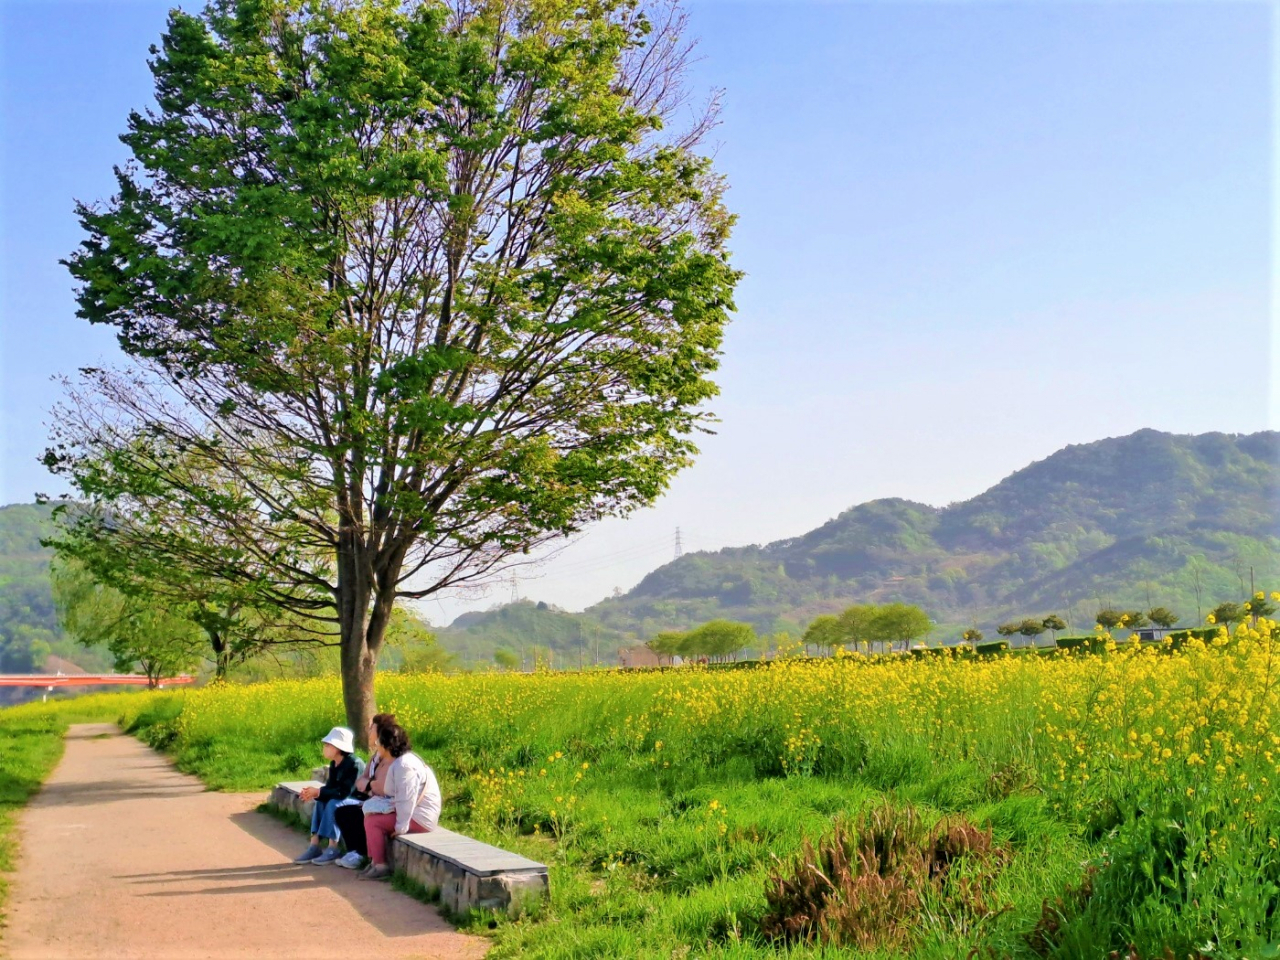 Visitors rest next to a field of canola flowers in Ggeutdeul Village, Gwangyang, South Jeolla Province, on Monday. (Lee Si-jin/The Korea Herald)